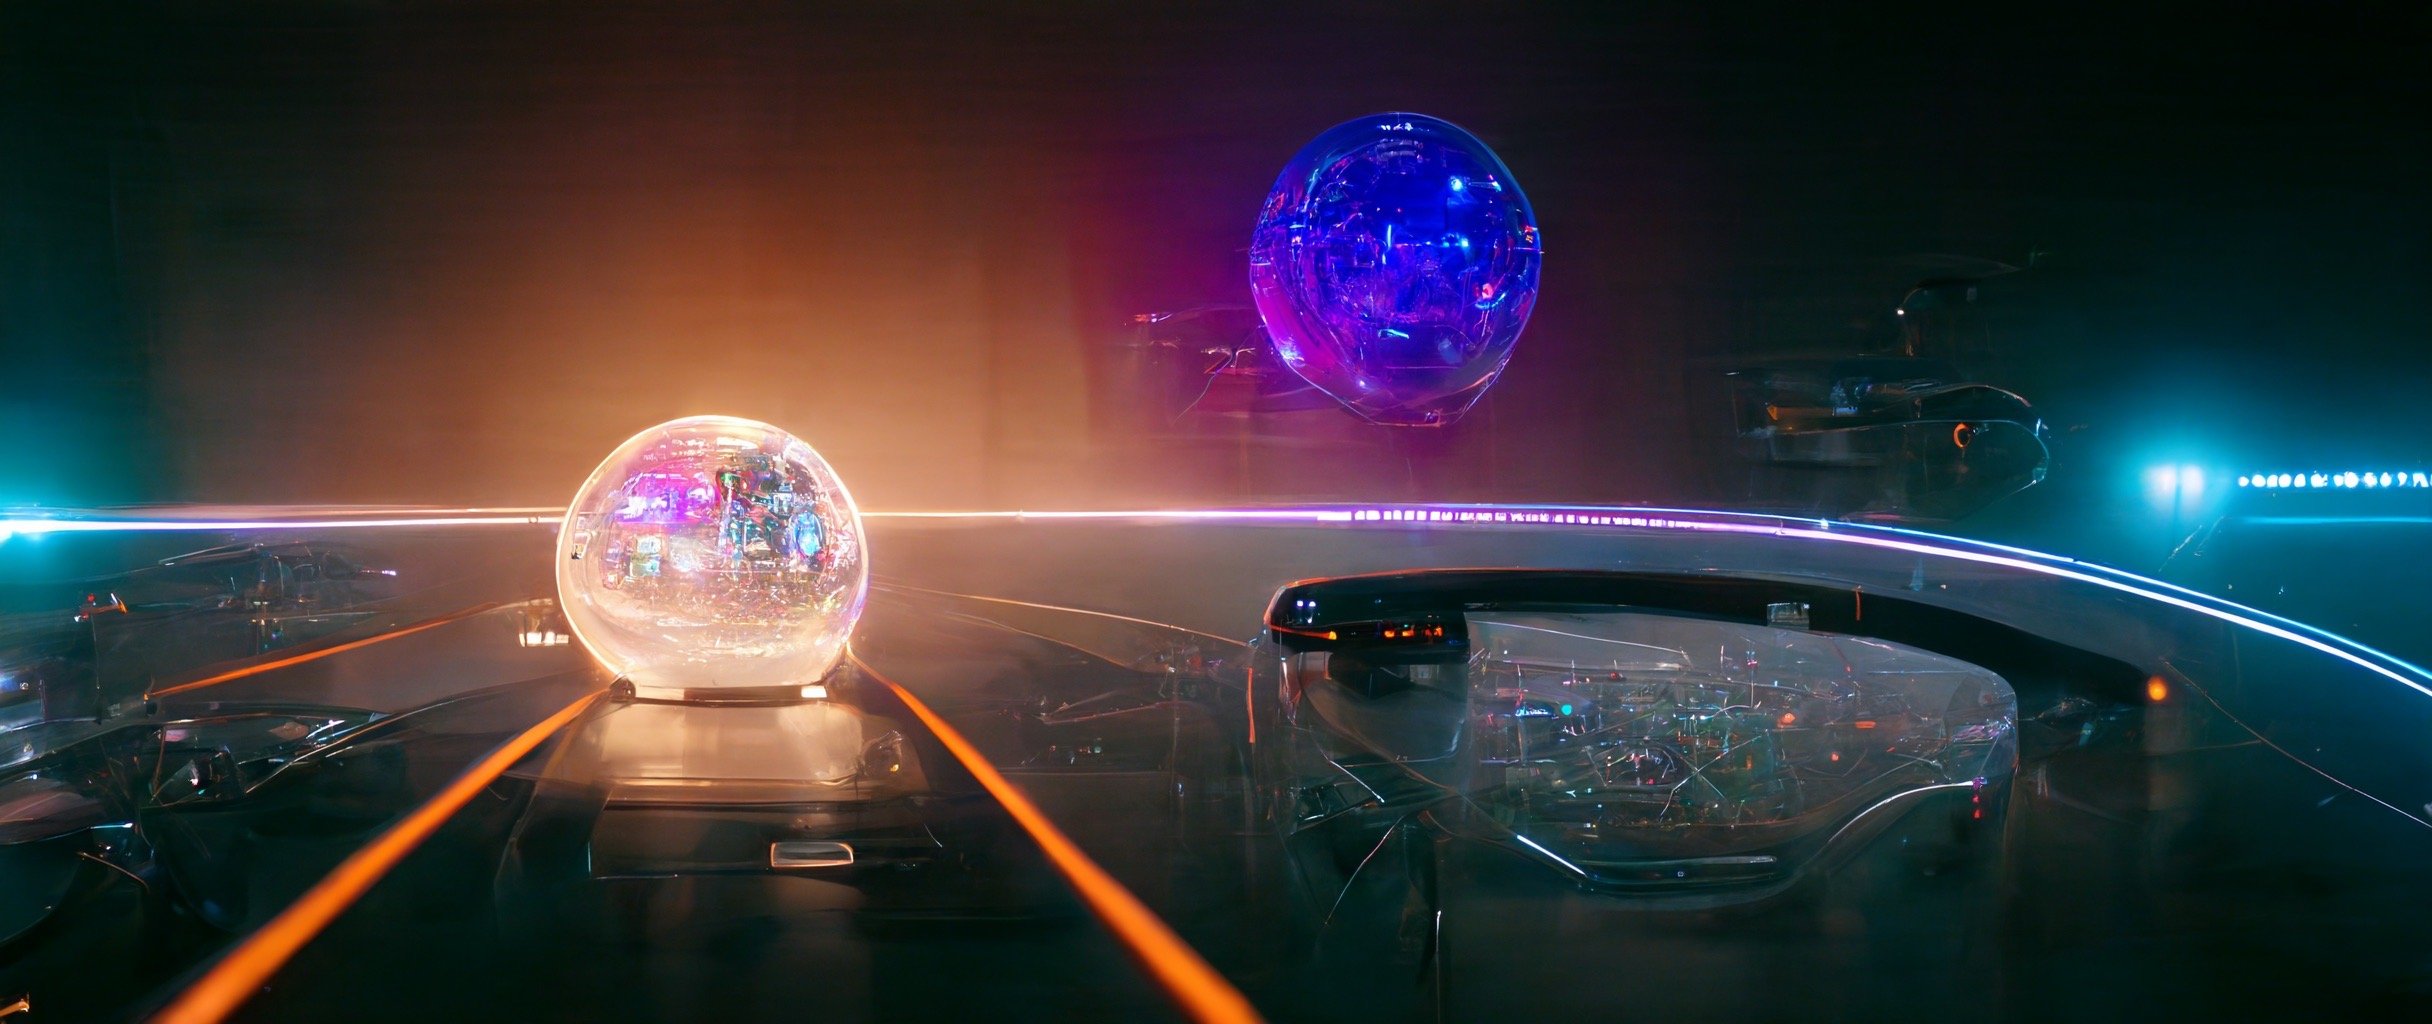 f6fa0efc-abb3-4280-bb05-e2d45e3be8de_S3RAPH_Amber_glowing_sci-fi_holographic_interface_screen_multiple_tech_colors_curved_sphere._Heads_up_displ.JPG